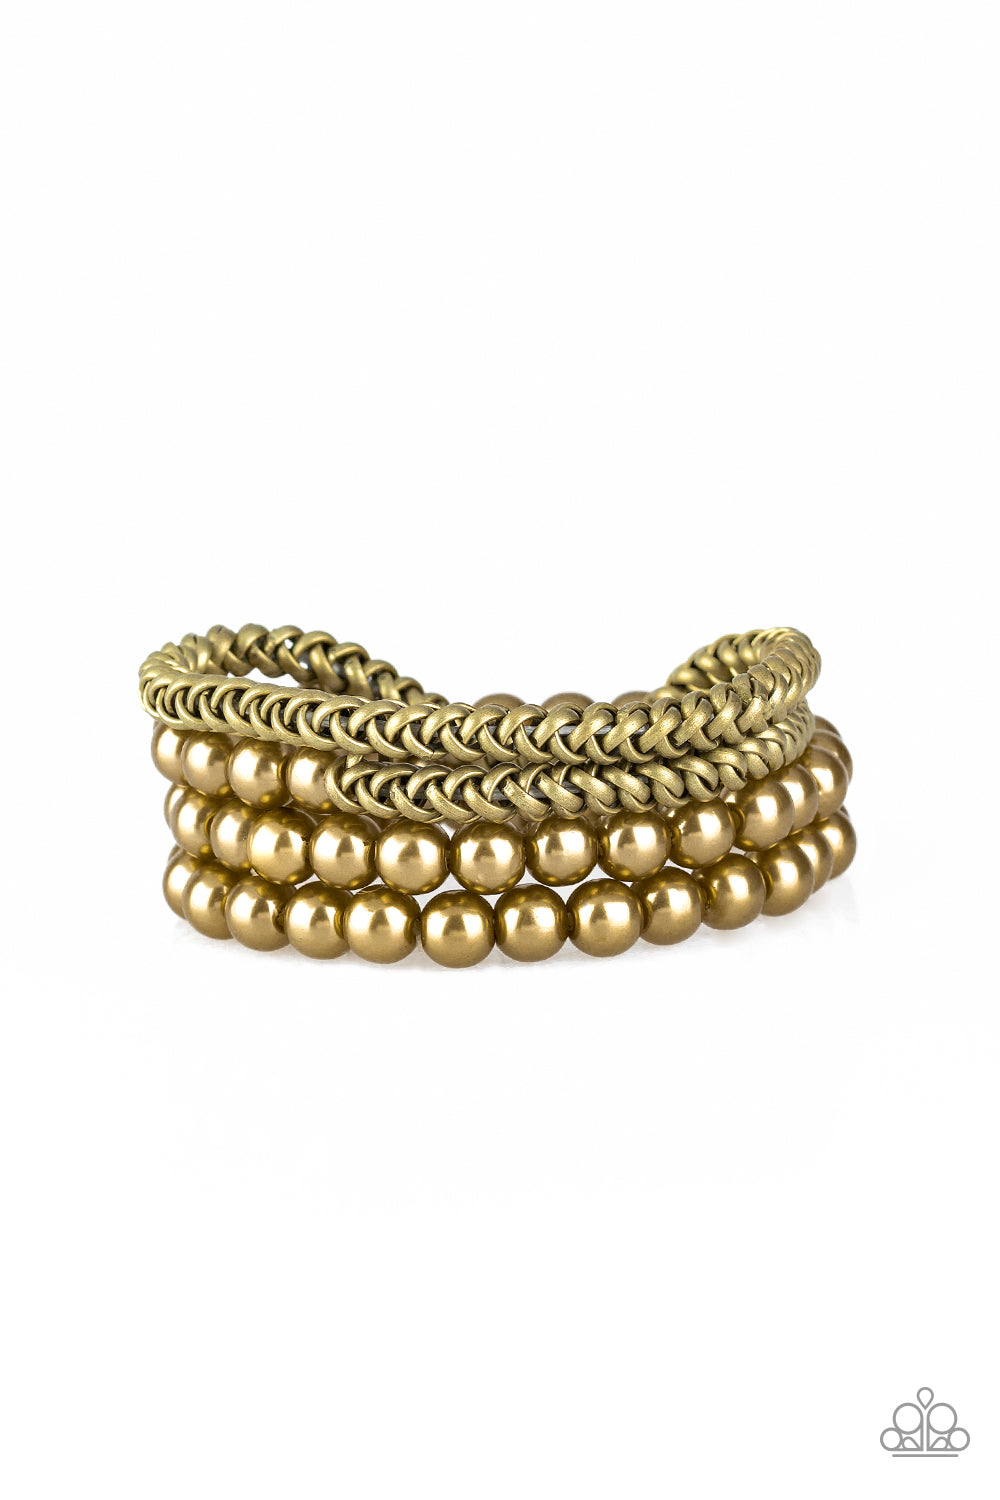 Paparazzi Industrial Incognito - Brass Bracelet - A Finishing Touch 